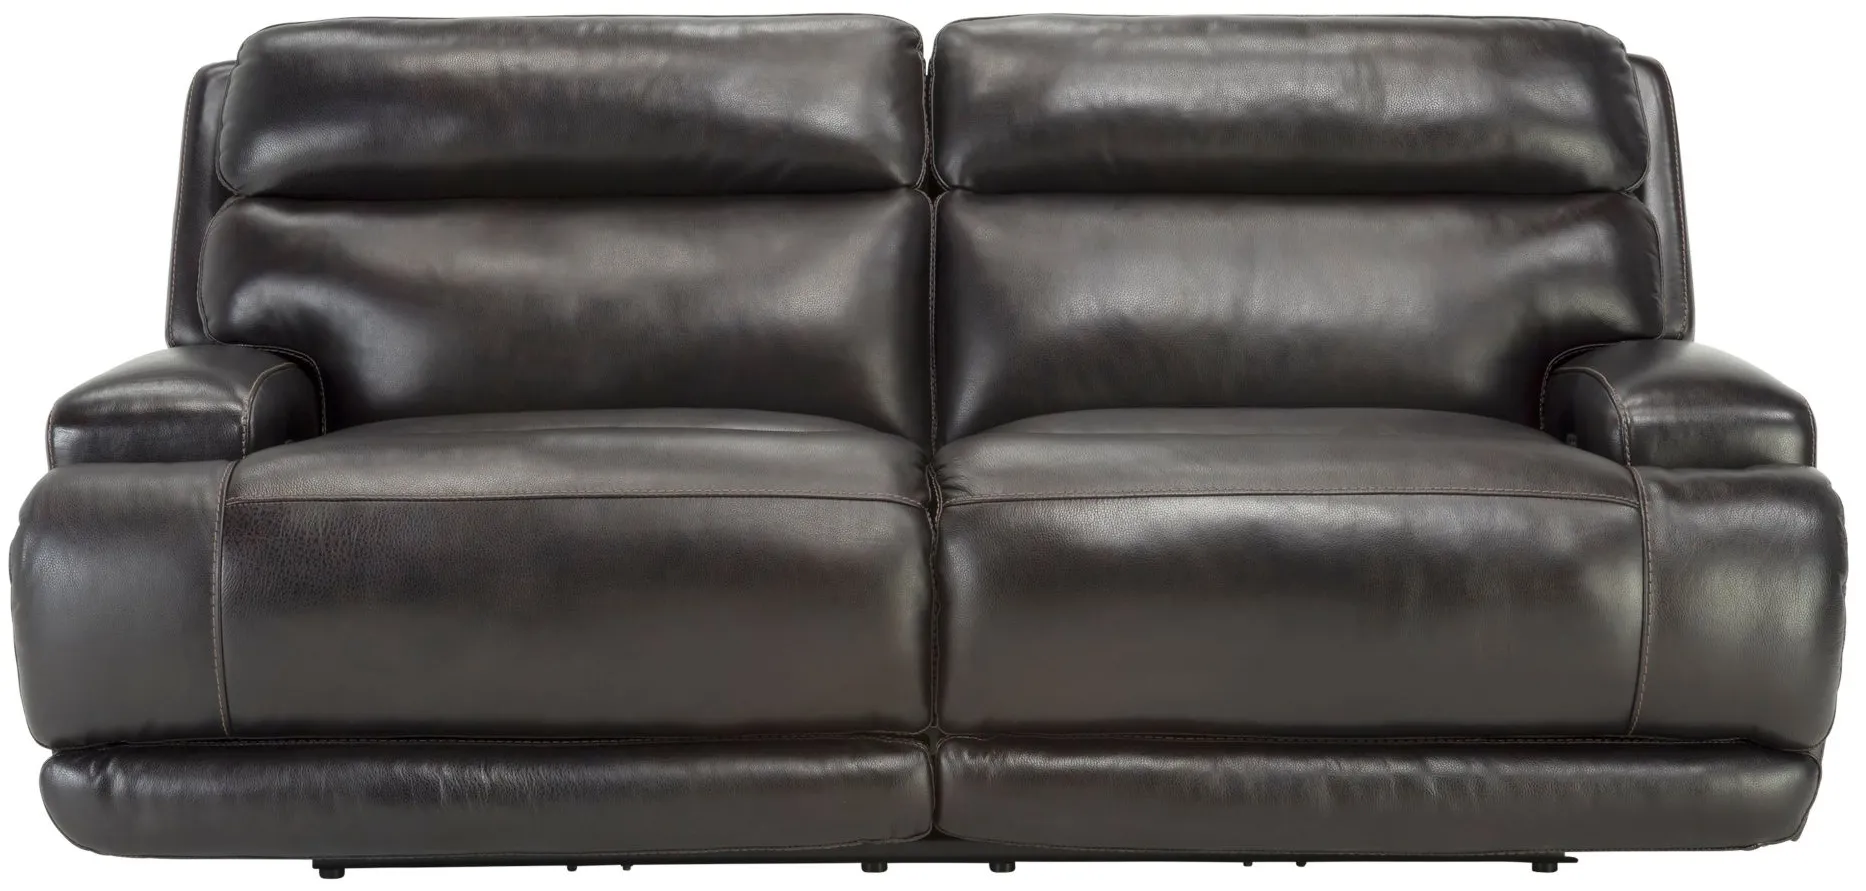 Tompkins Power-Reclining Sofa in Blackberry by Bellanest